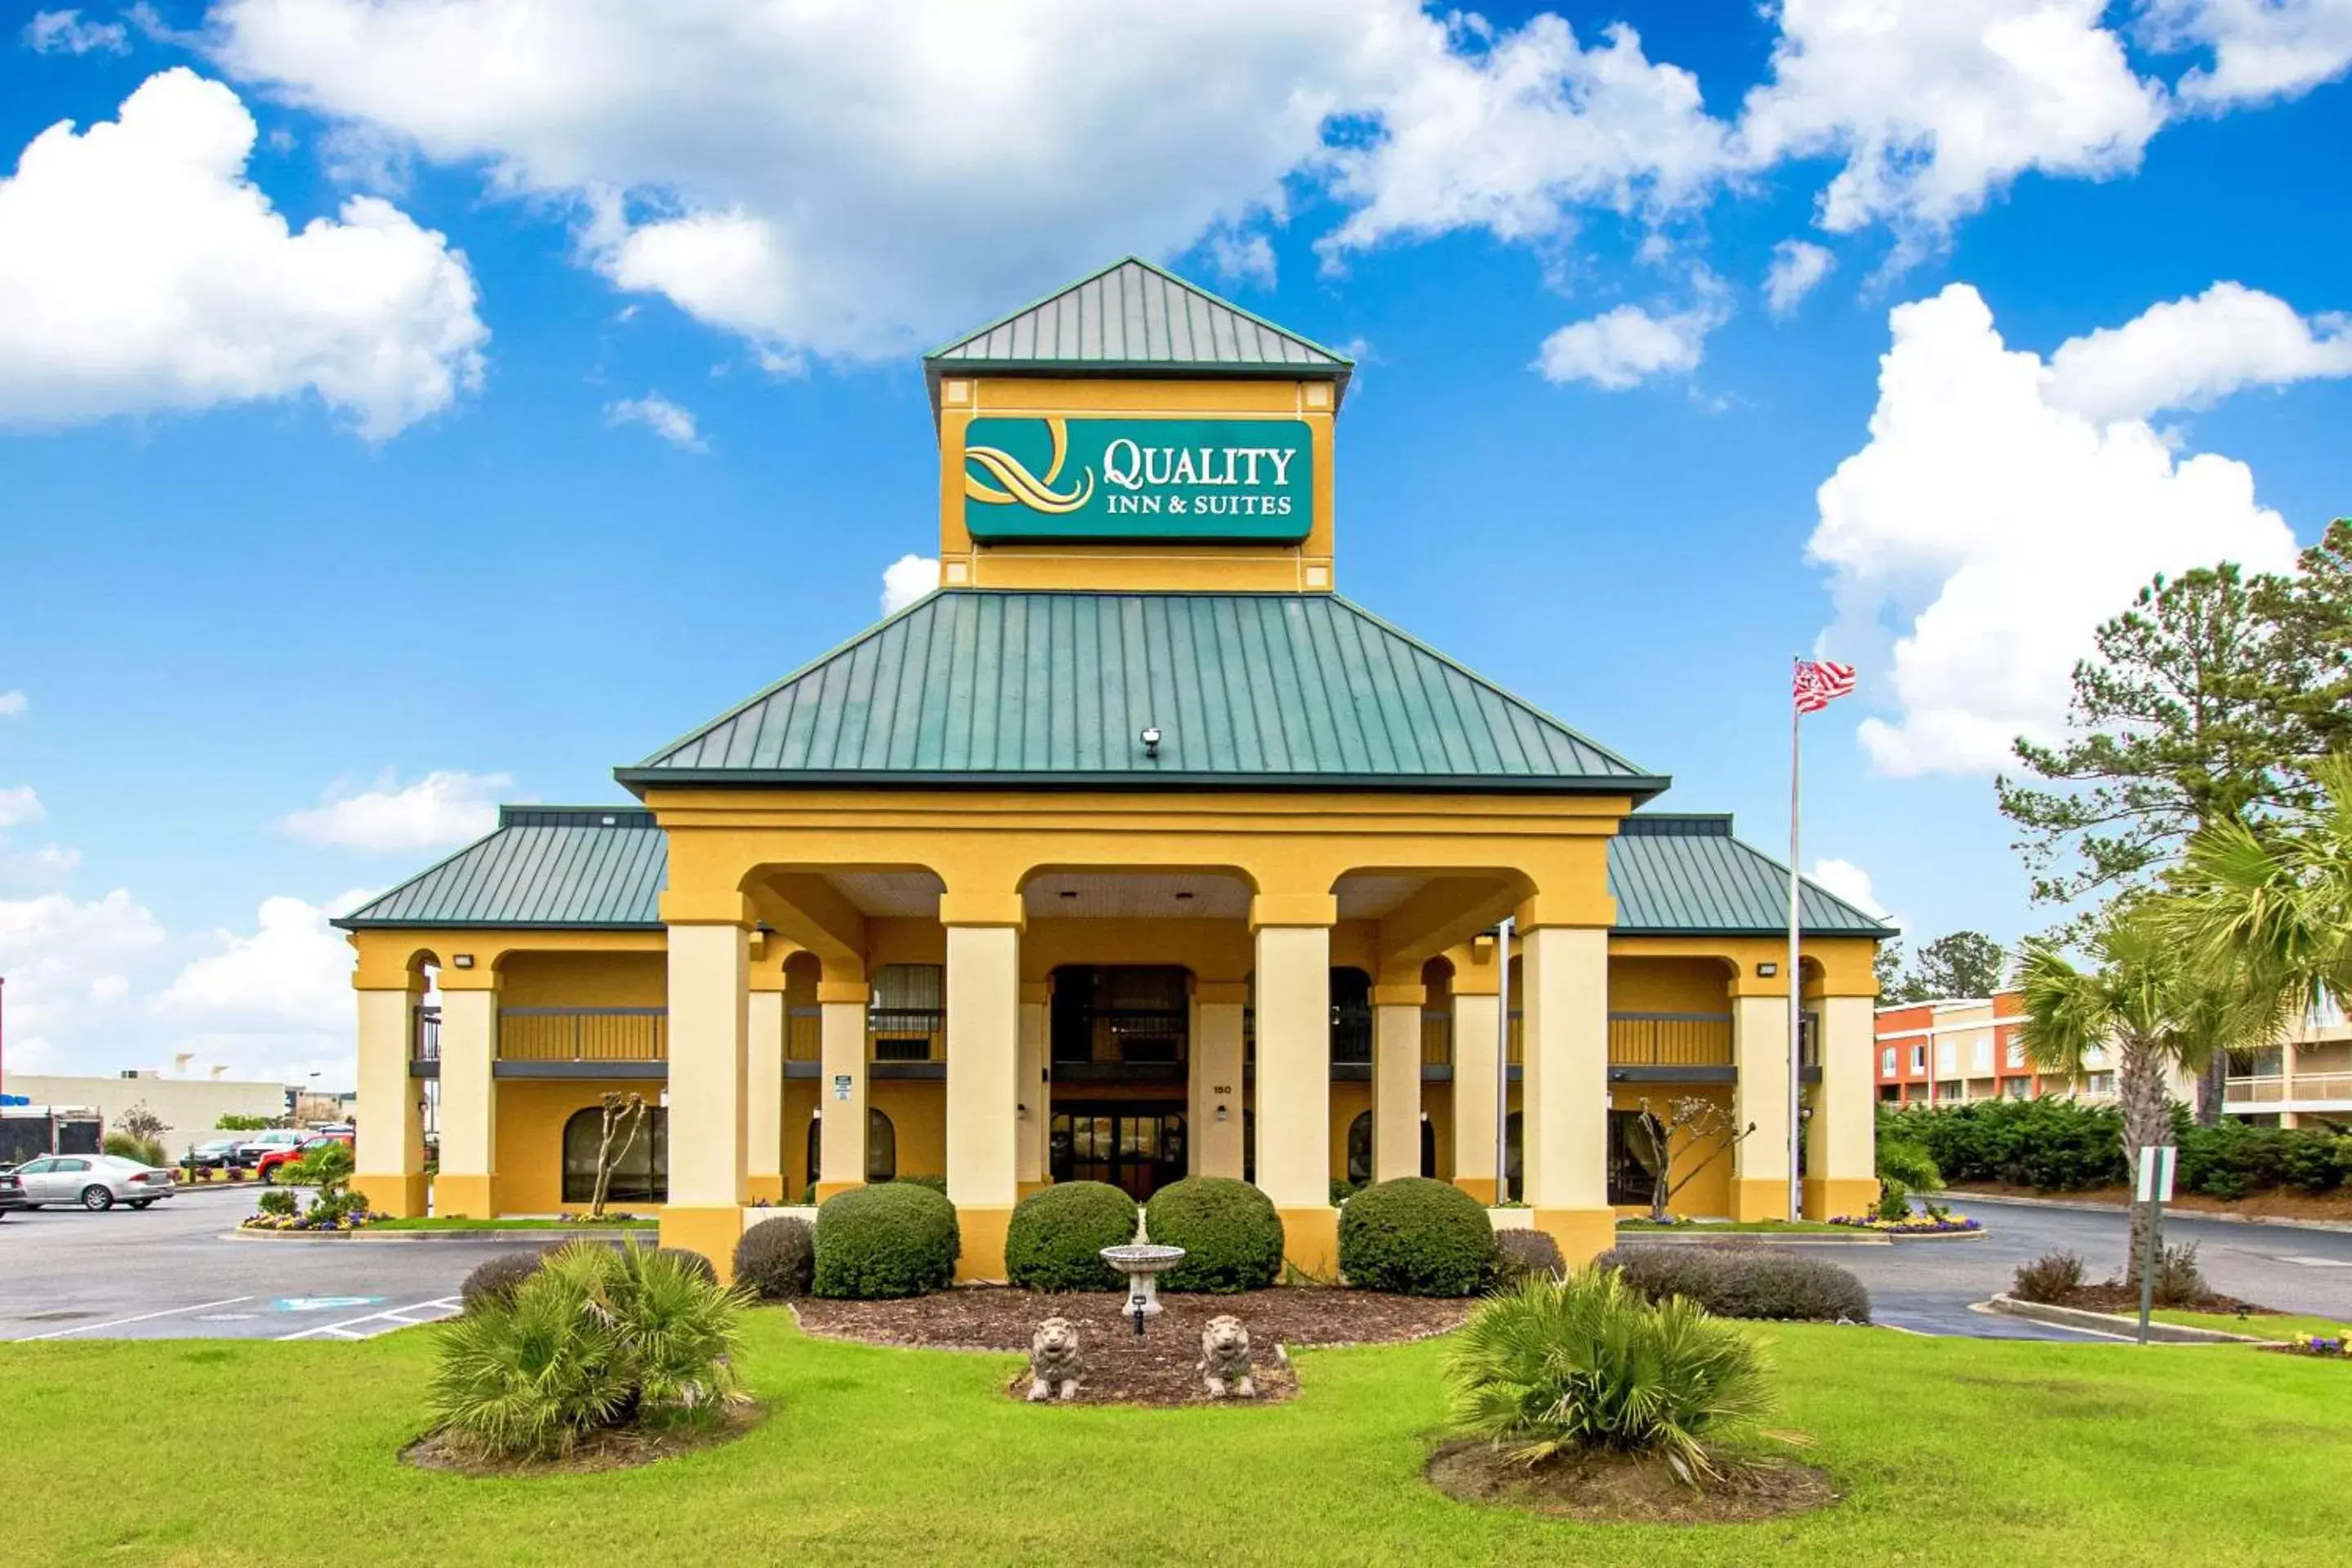 Property Building in Quality Inn & Suites Civic Center